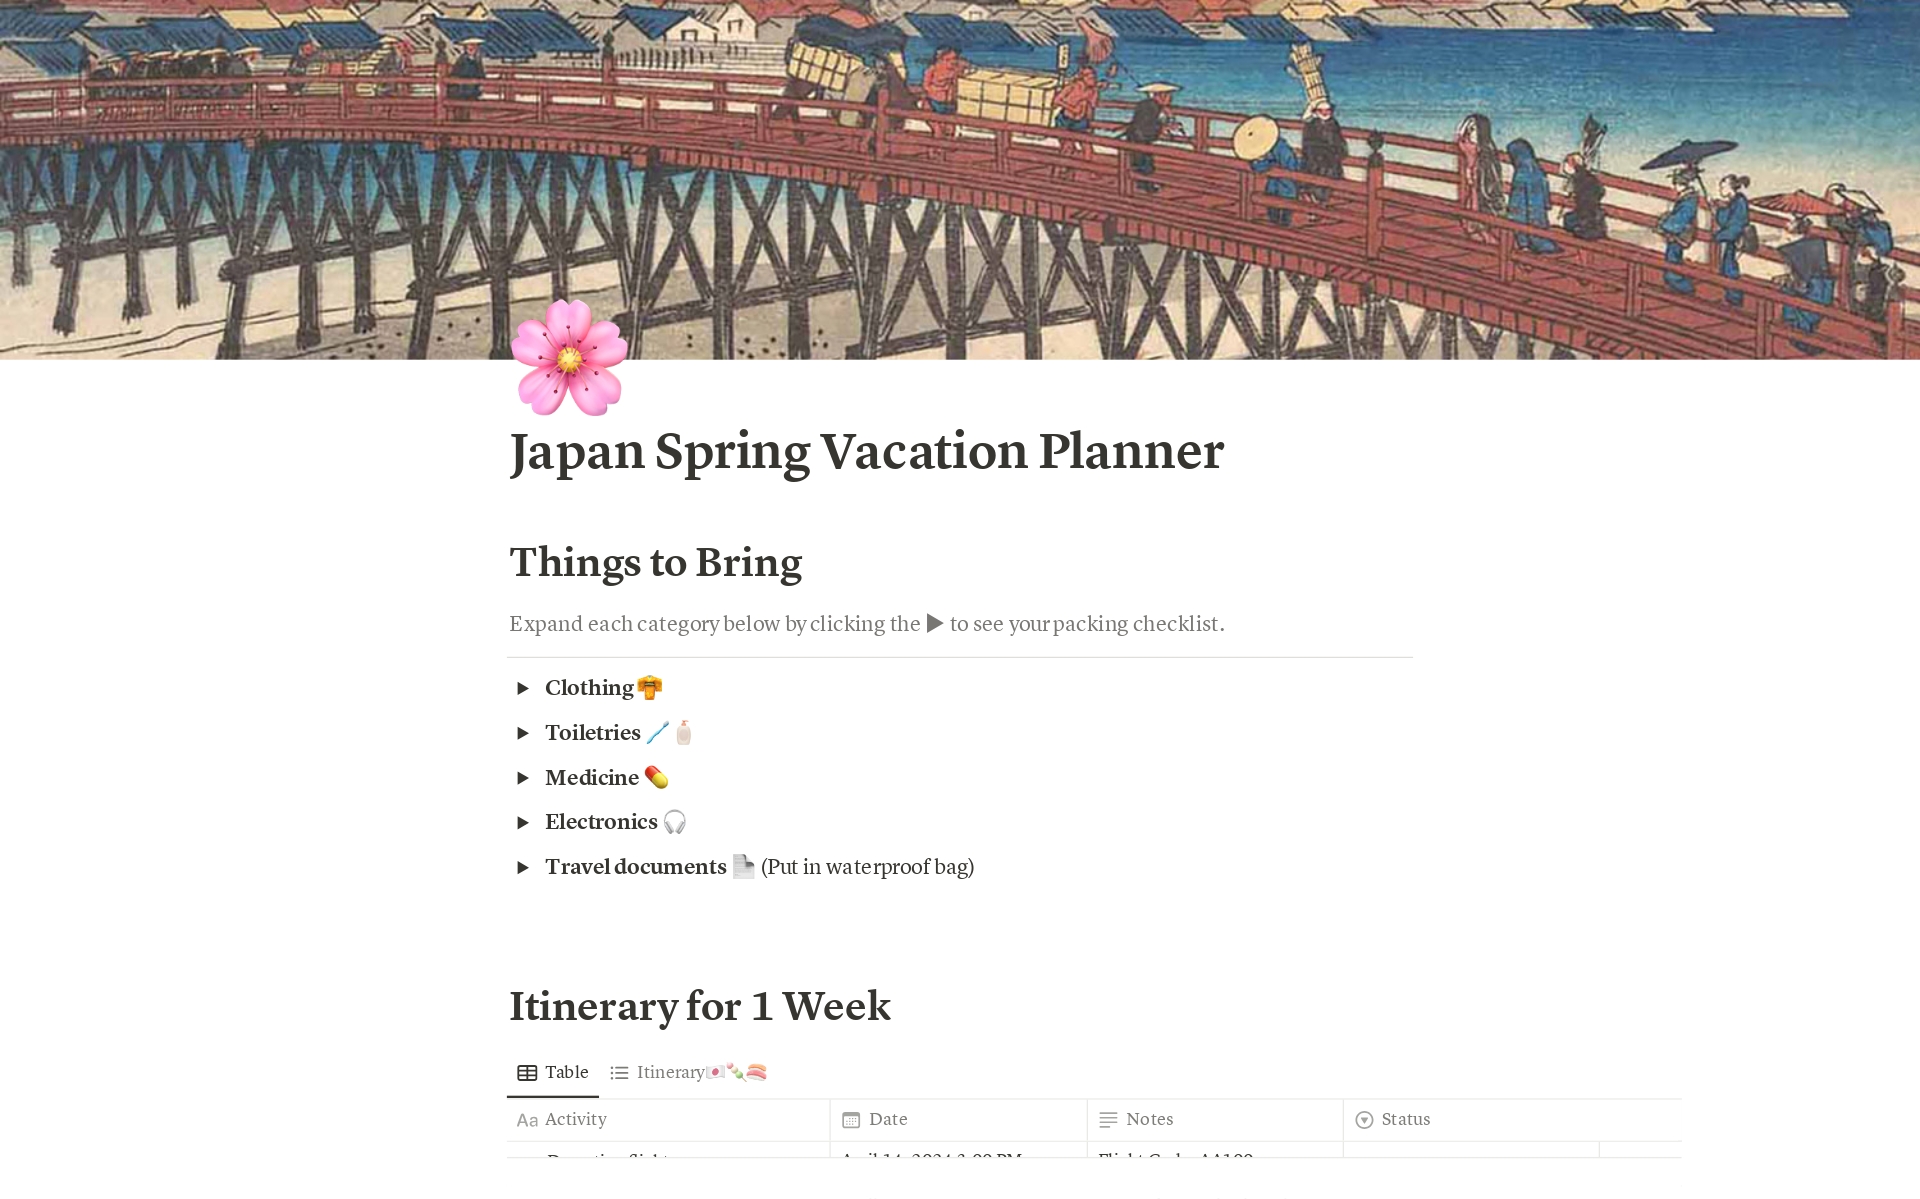 Experience Japan in full bloom with our one-week spring vacation planner! Enjoy Tokyo’s vibrant cityscape, Kyoto’s serene temples, and the stunning cherry blossoms in between. Includes key cultural sites, day trips, and insider tips for an unforgettable, hassle-free adventure.